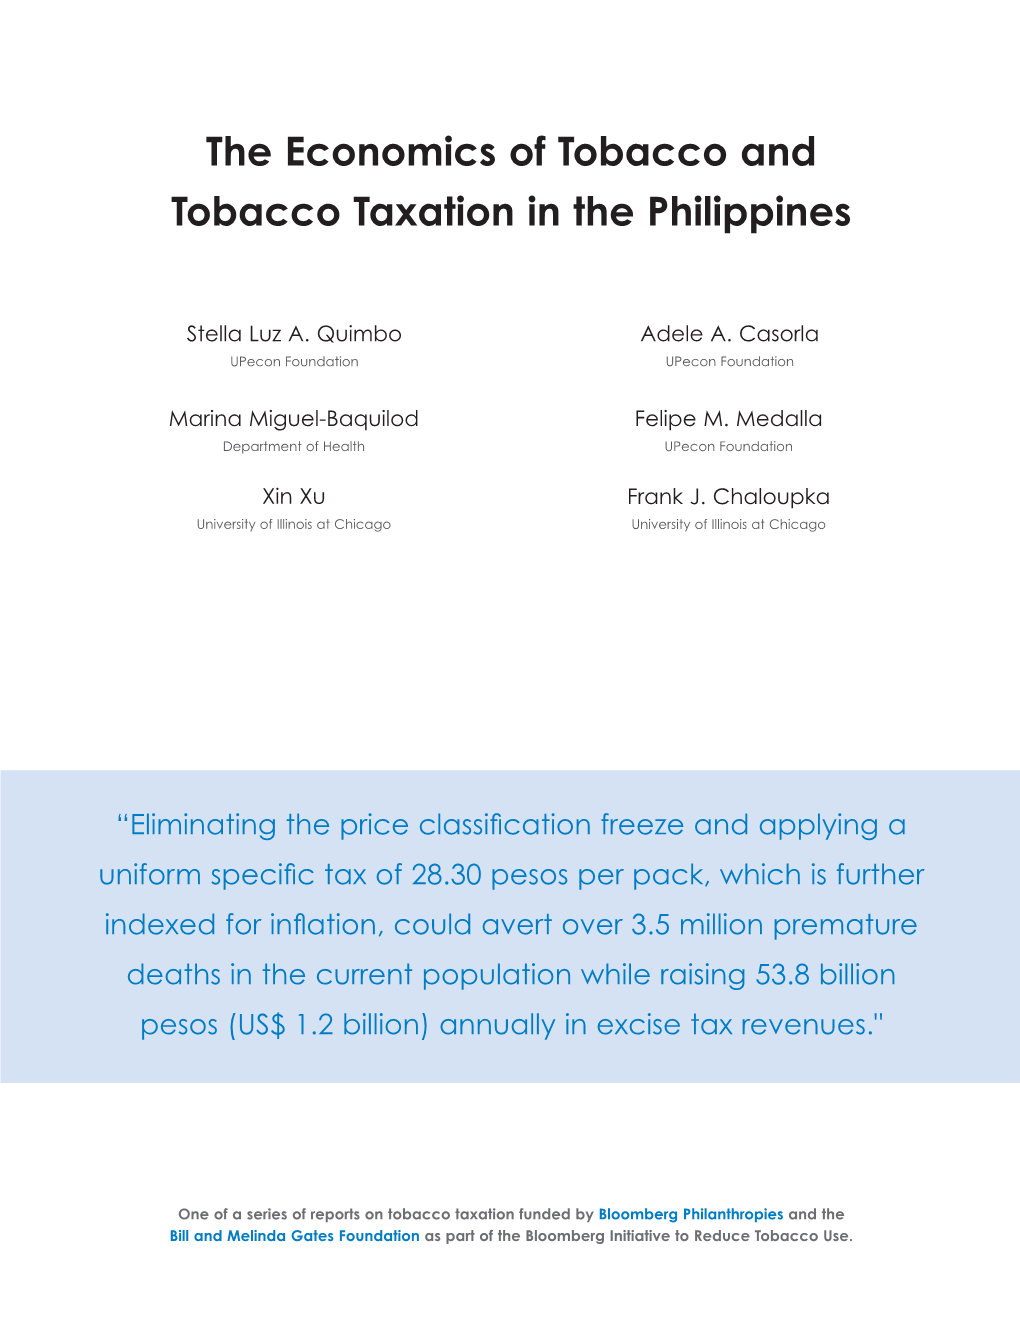 The Economics of Tobacco and Tobacco Taxation in the Philippines